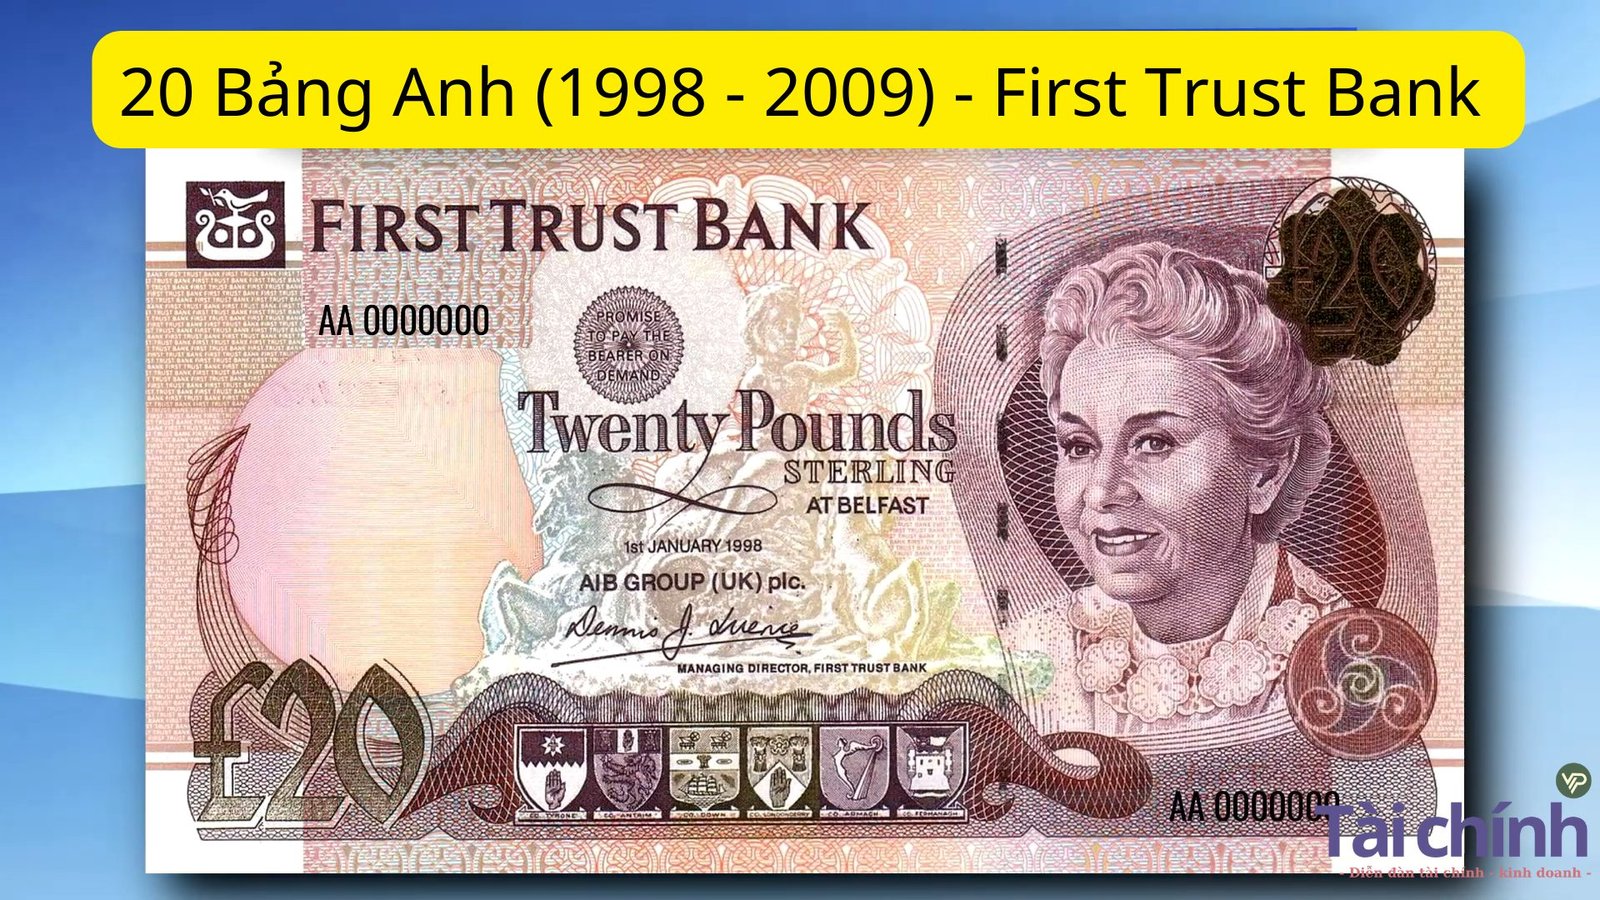 20 Bảng Anh (1998 - 2009) - First Trust Bank